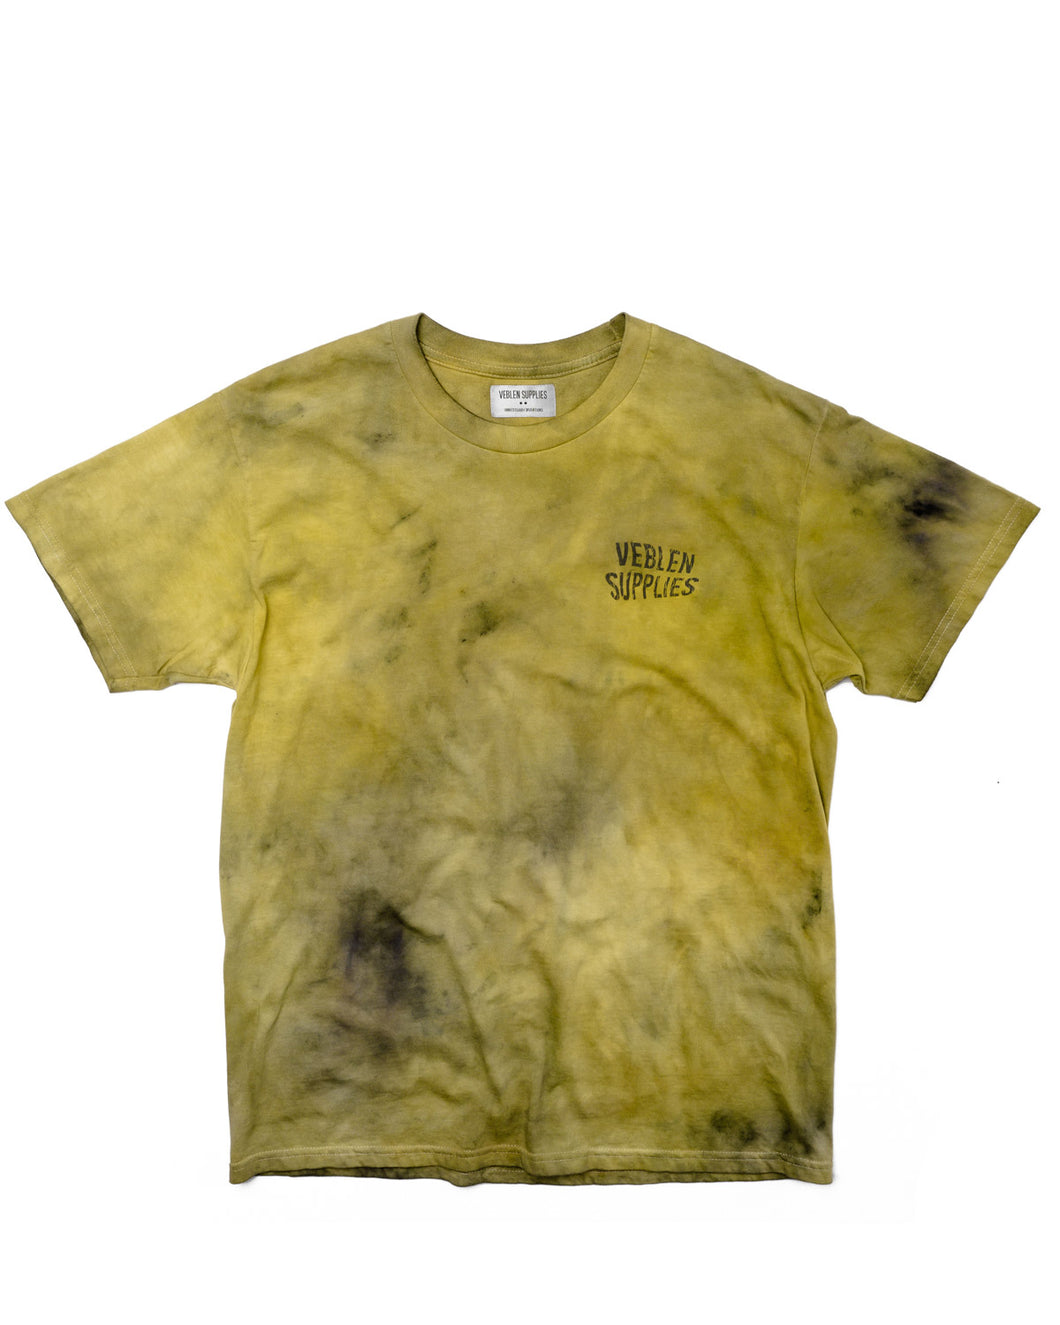 VARIEGATED T-SHIRT COL 3